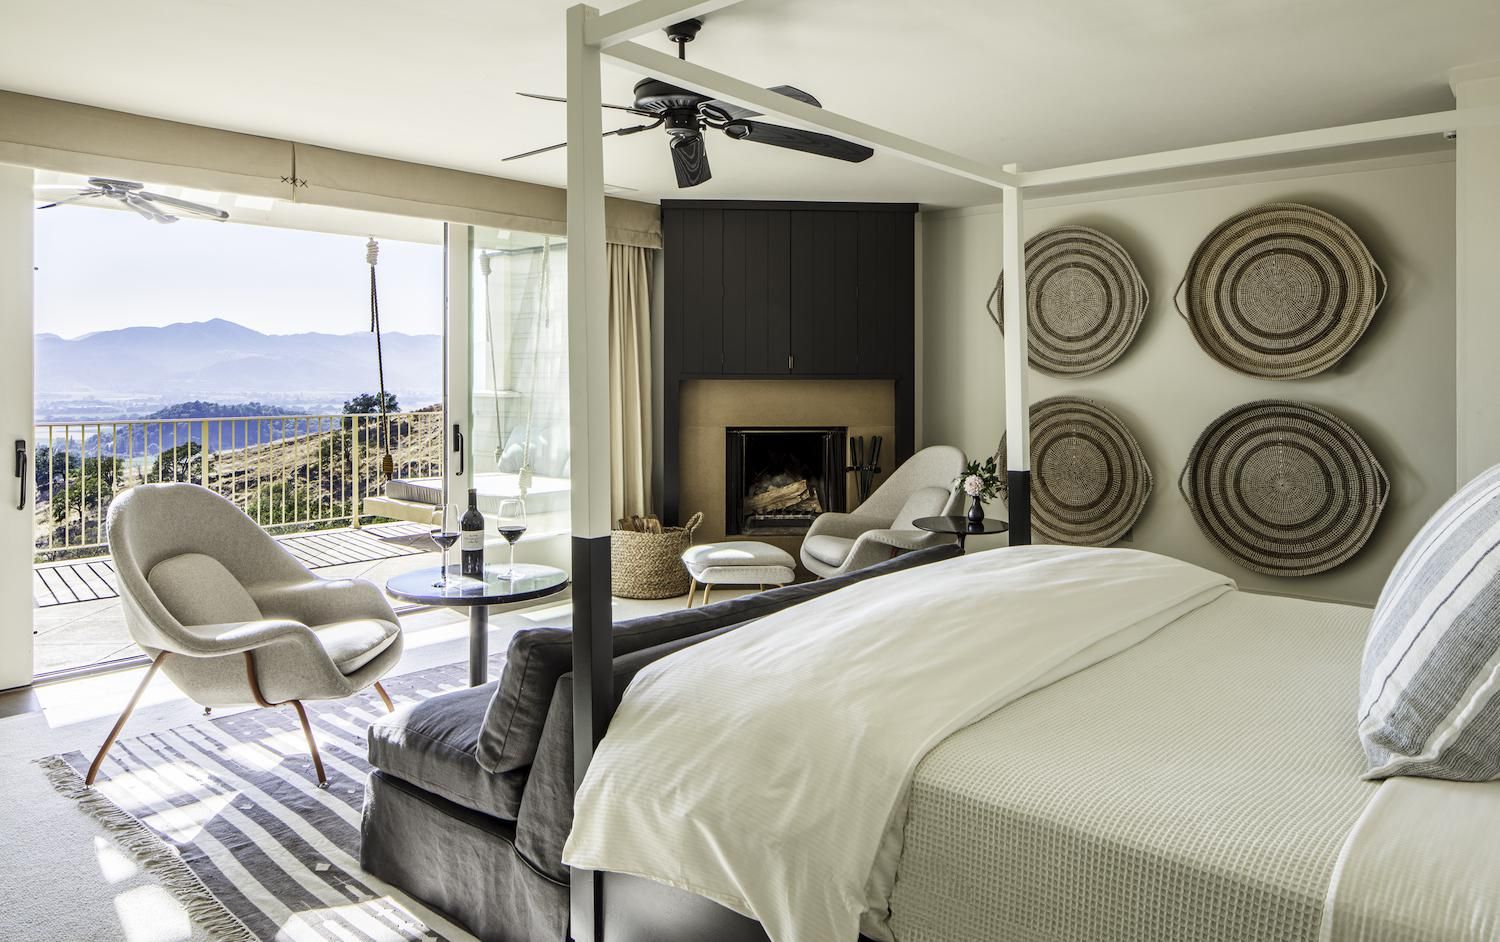 Napa’s most exclusive luxury hotel gets a glow up from designer Erin Martin